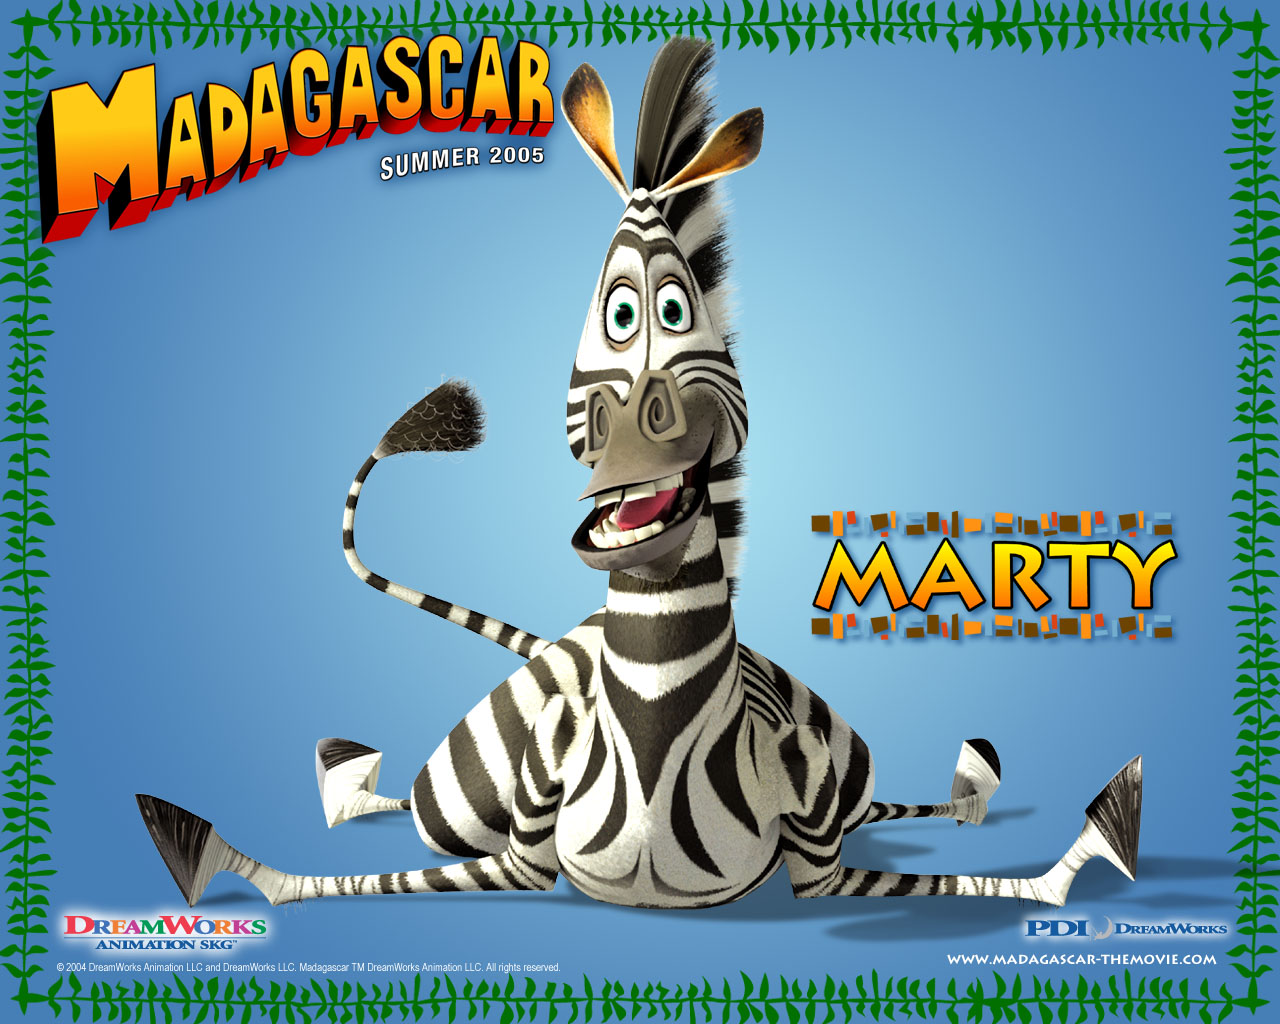 Marty The Zebra From Madagascar Wallpaper - Marty Madagascar , HD Wallpaper & Backgrounds